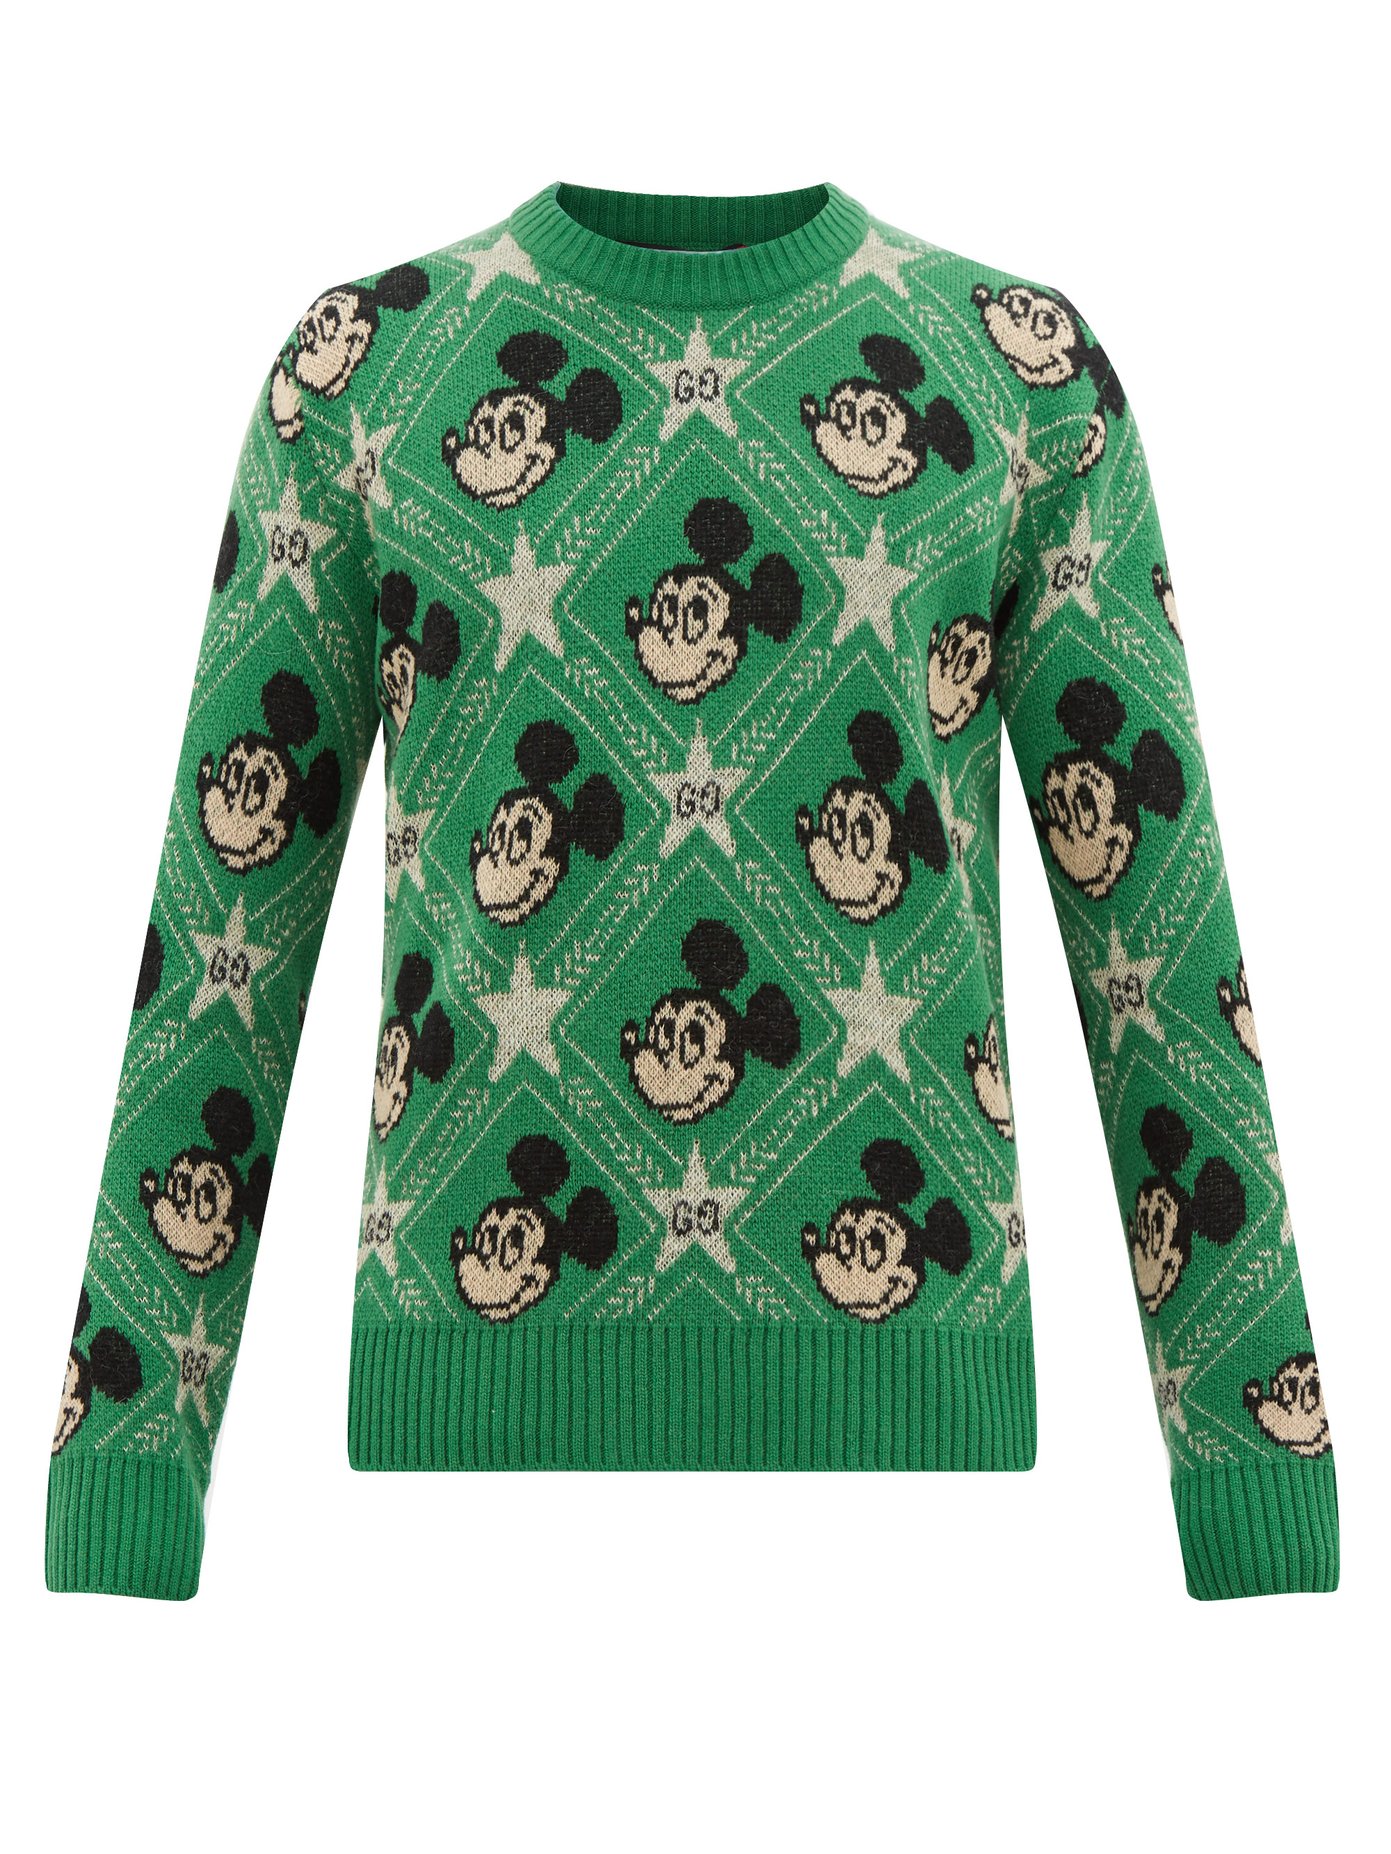 gucci mickey mouse jumper